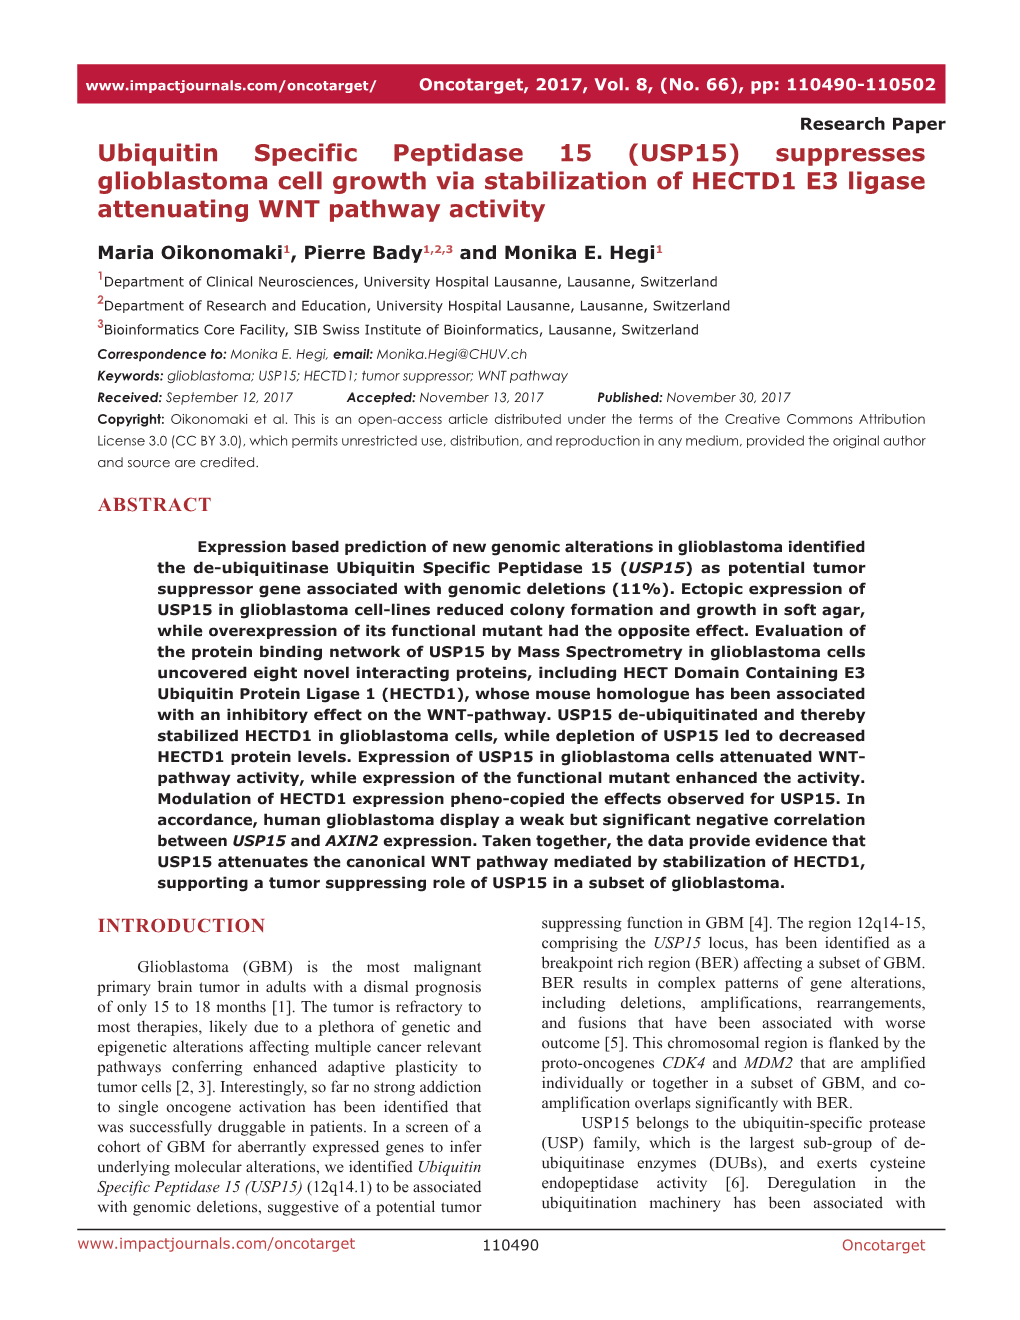 Ubiquitin Specific Peptidase 15 (USP15) Suppresses Glioblastoma Cell Growth Via Stabilization of HECTD1 E3 Ligase Attenuating WNT Pathway Activity